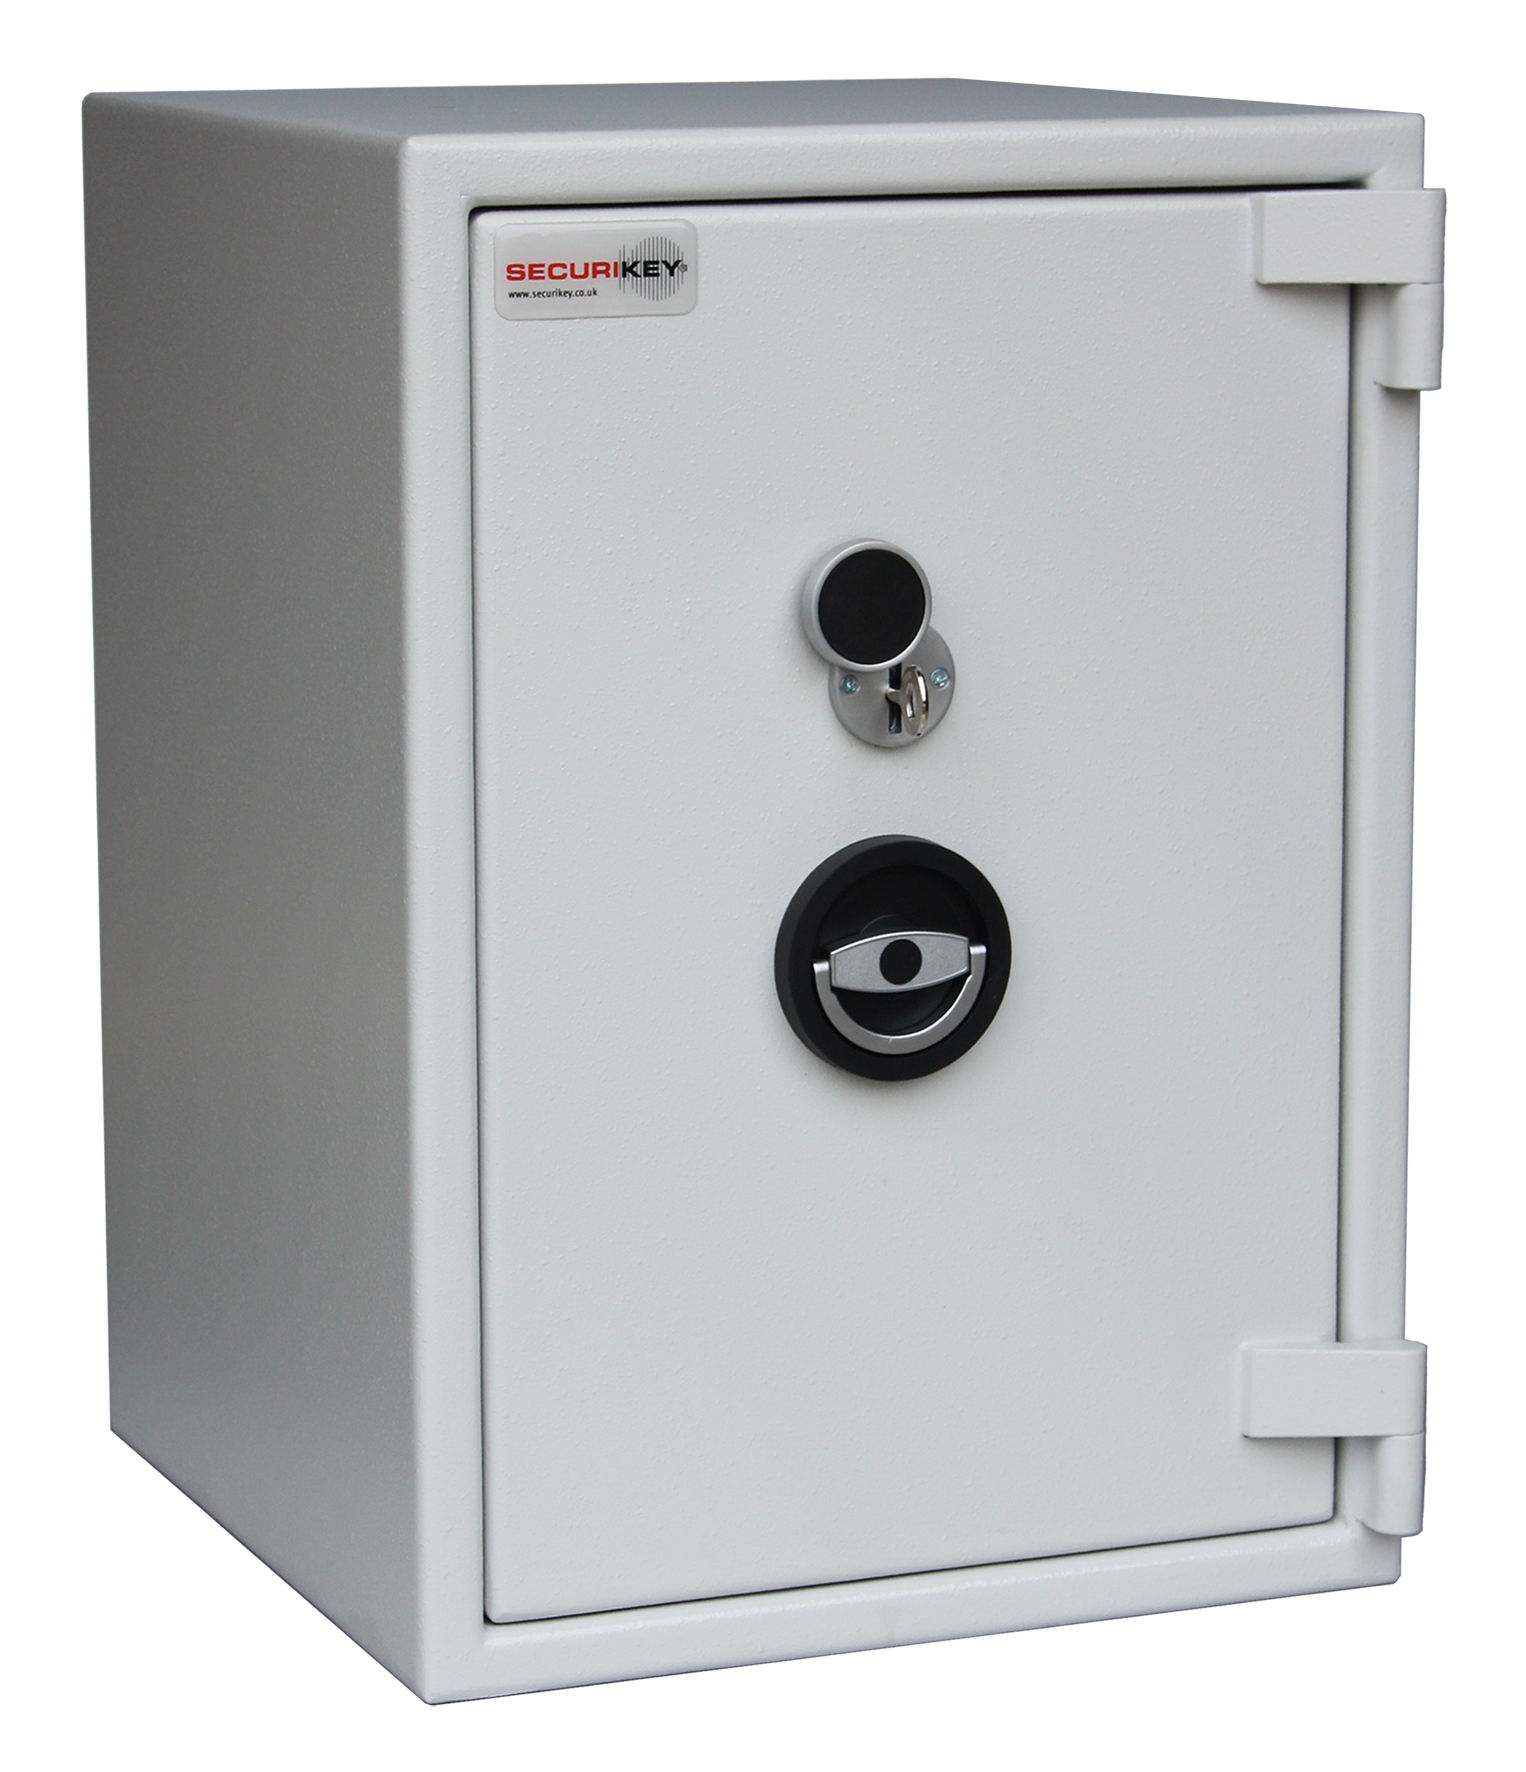 Securikey Euro Grade 0 oo55K Safe forthe office with high security keylock